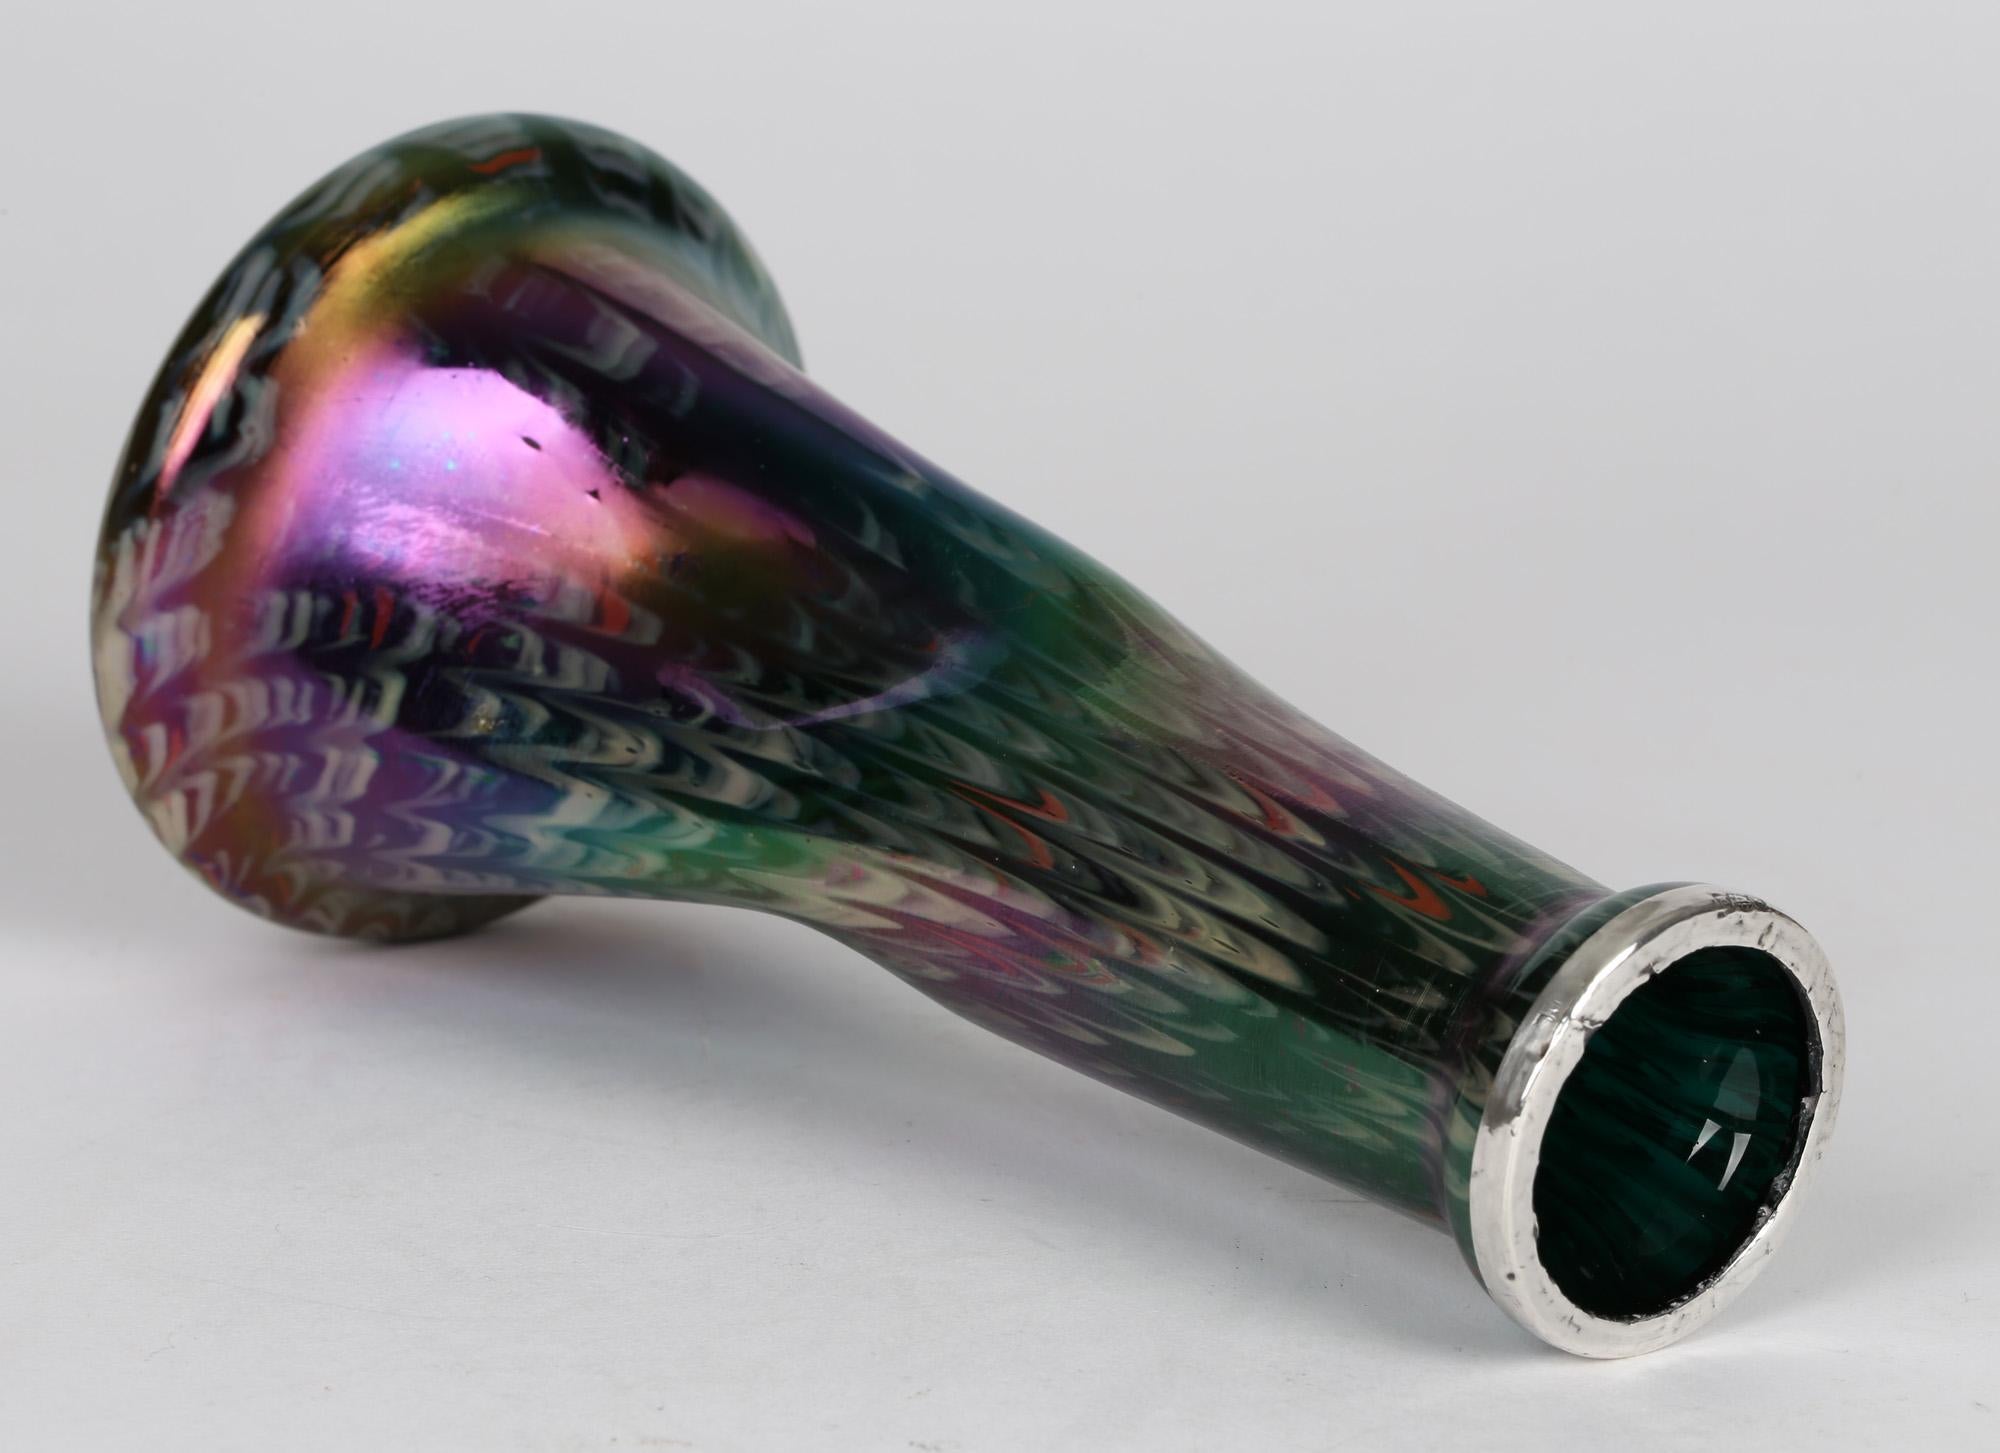 A stunning Bohemian Art Nouveau art glass vase with an iridescent snake skin finish and silver rim by Josef Rindskopf and dating from around 1905. The vase has a wide rounded base and narrowing rounded body with a twist design to the body of the